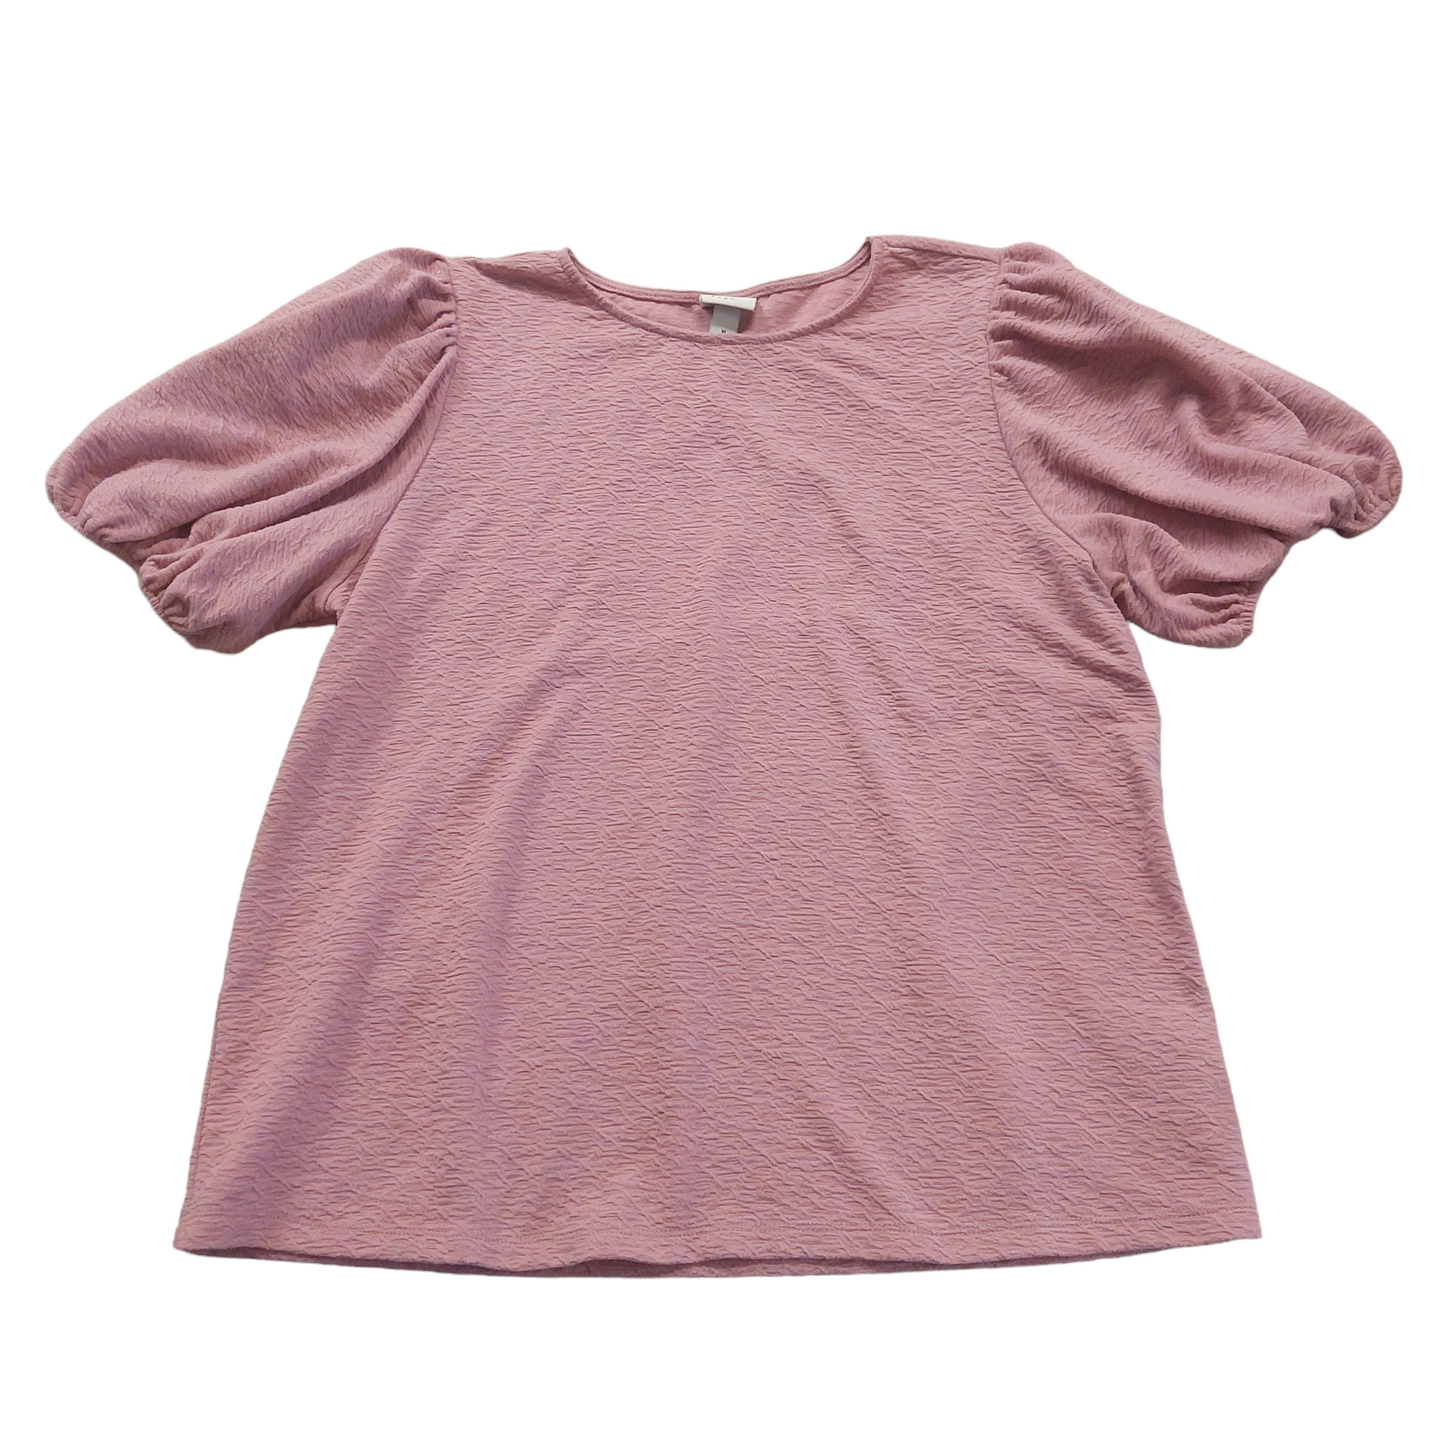 Pink Top Short Sleeve A New Day, Size M